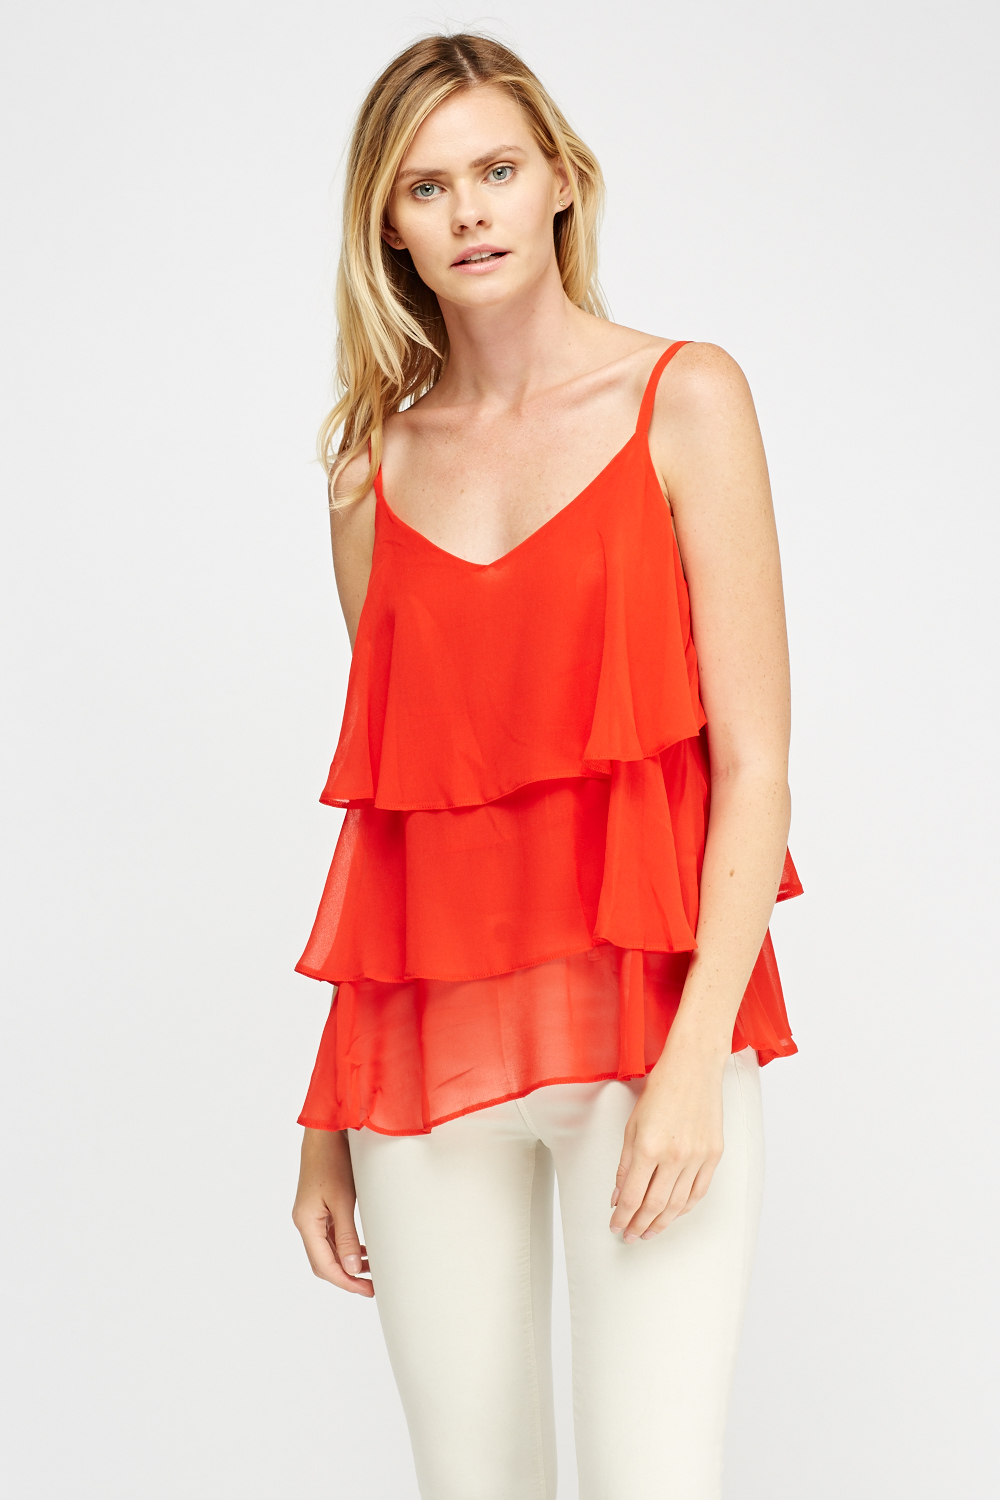 Layered Red Cami Top - Just $3